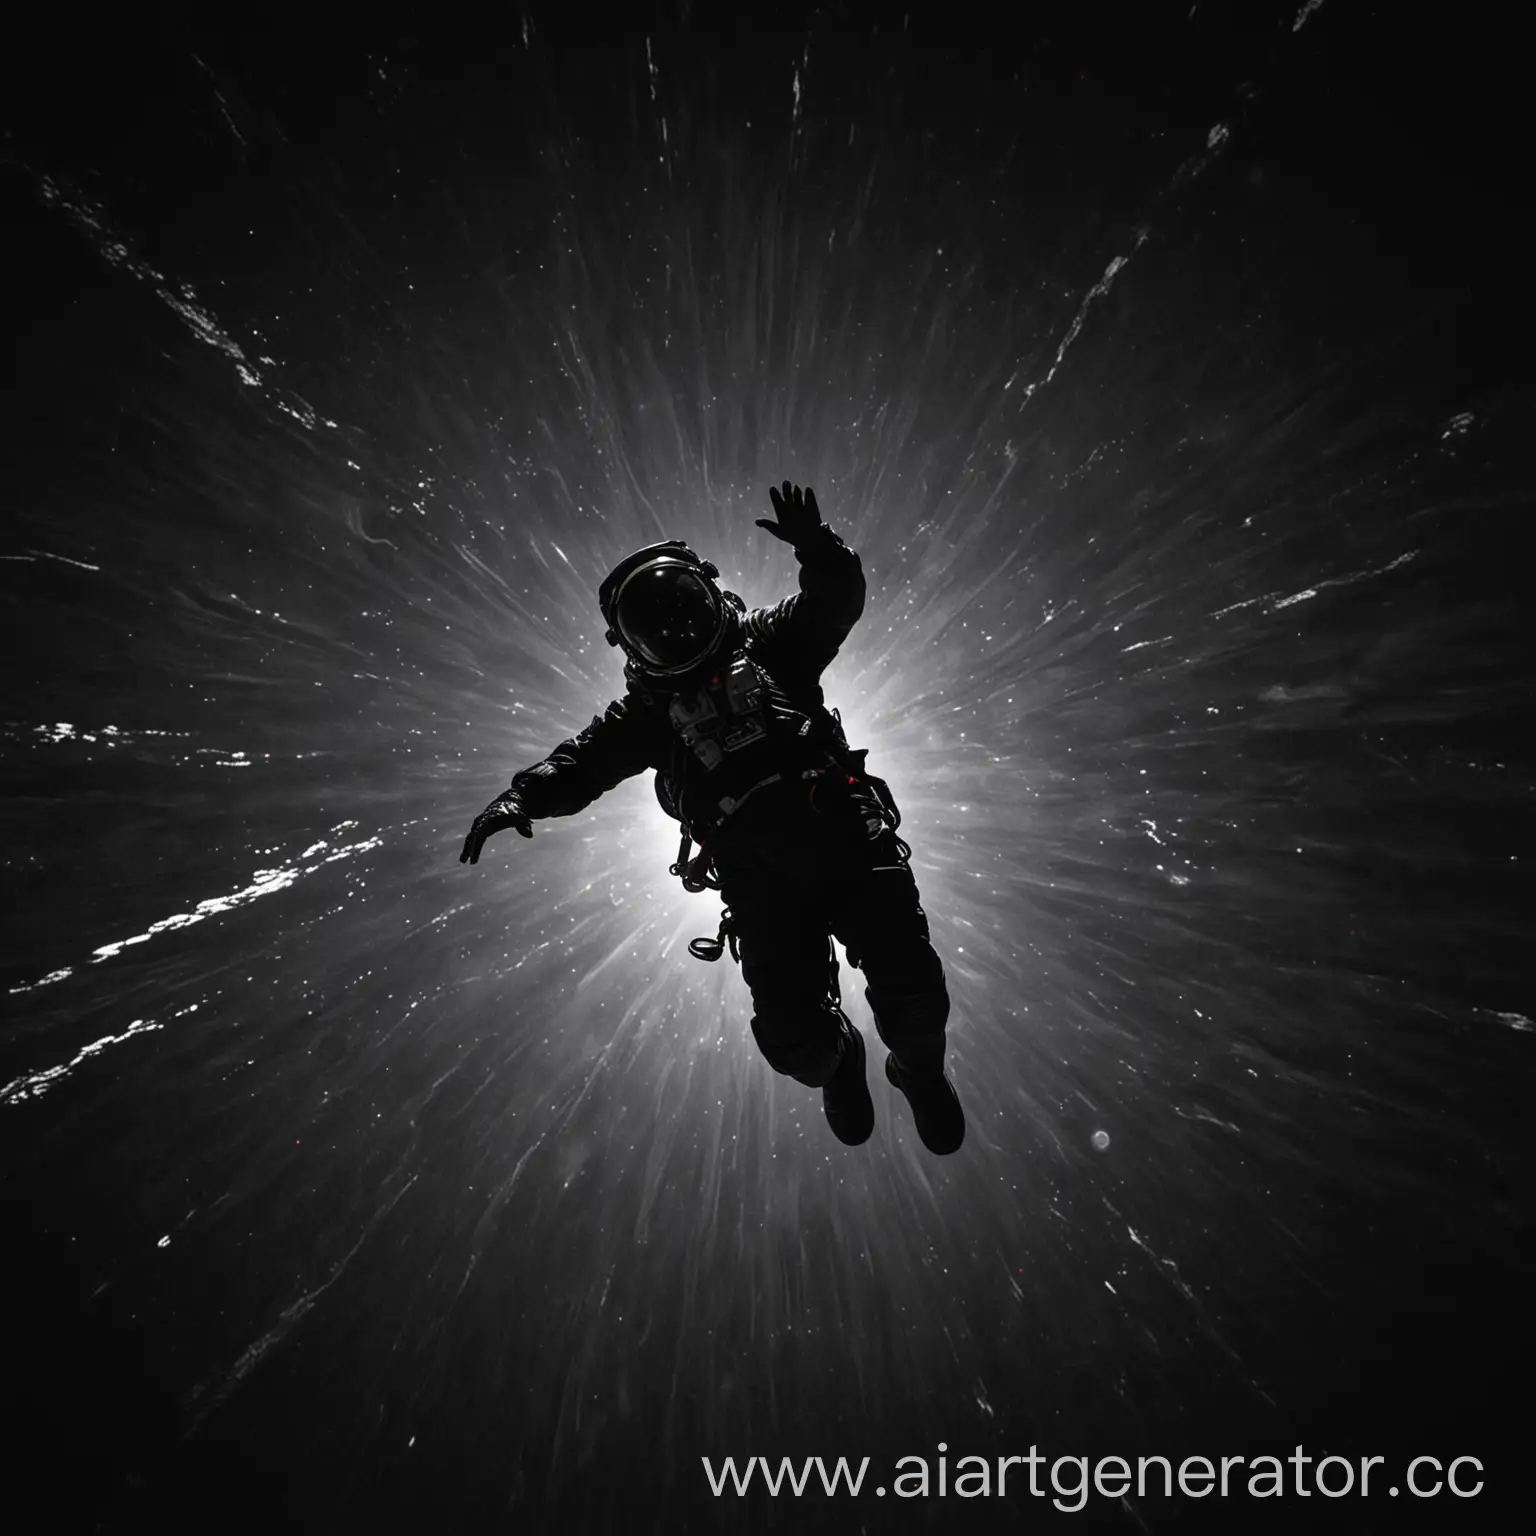 Astronaut-Freefall-Exploring-Darkness-with-Morales-Pose